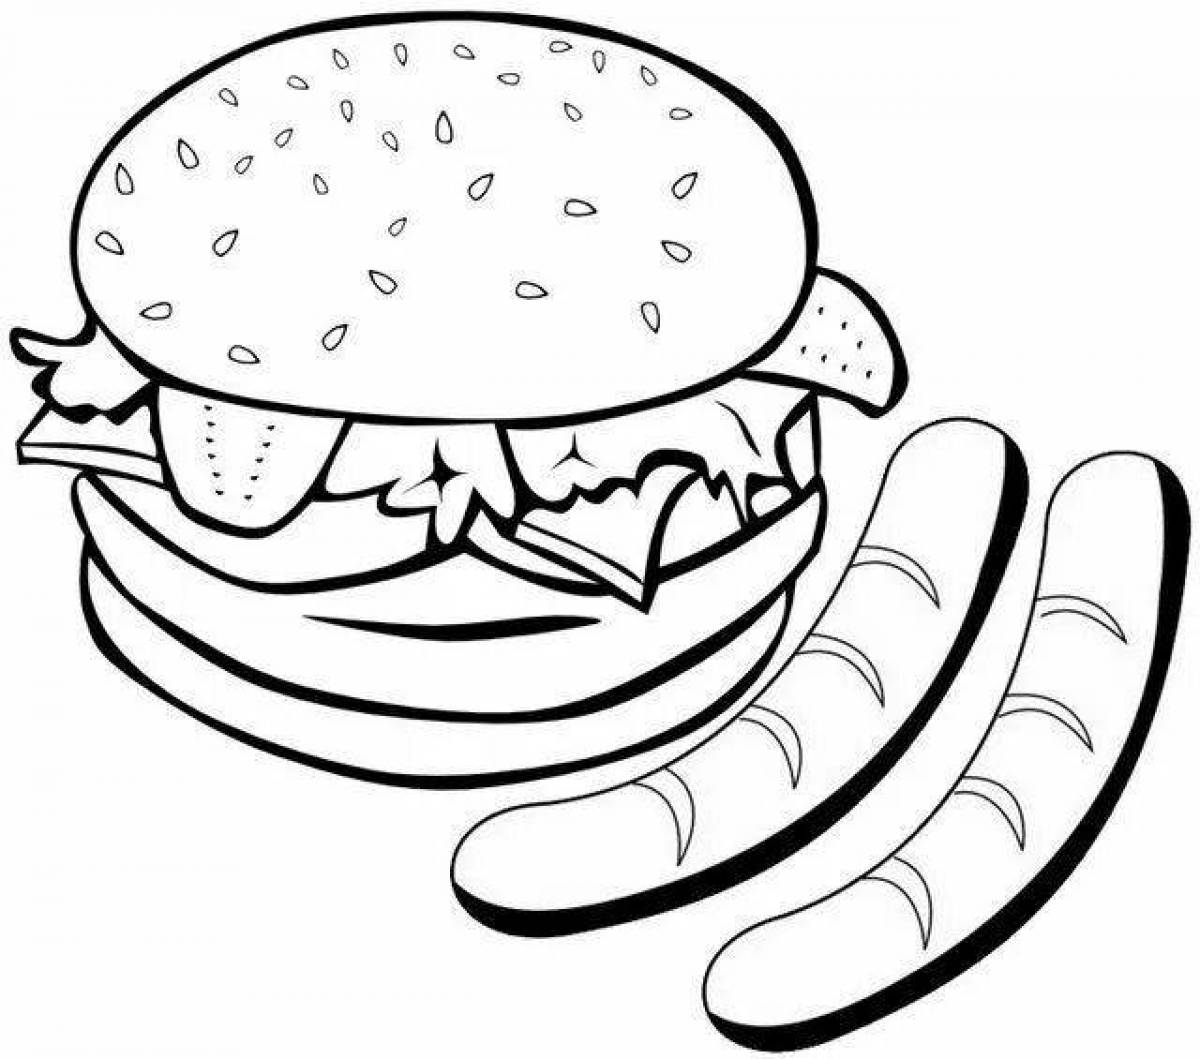 Outstanding hamburger coloring page for kids